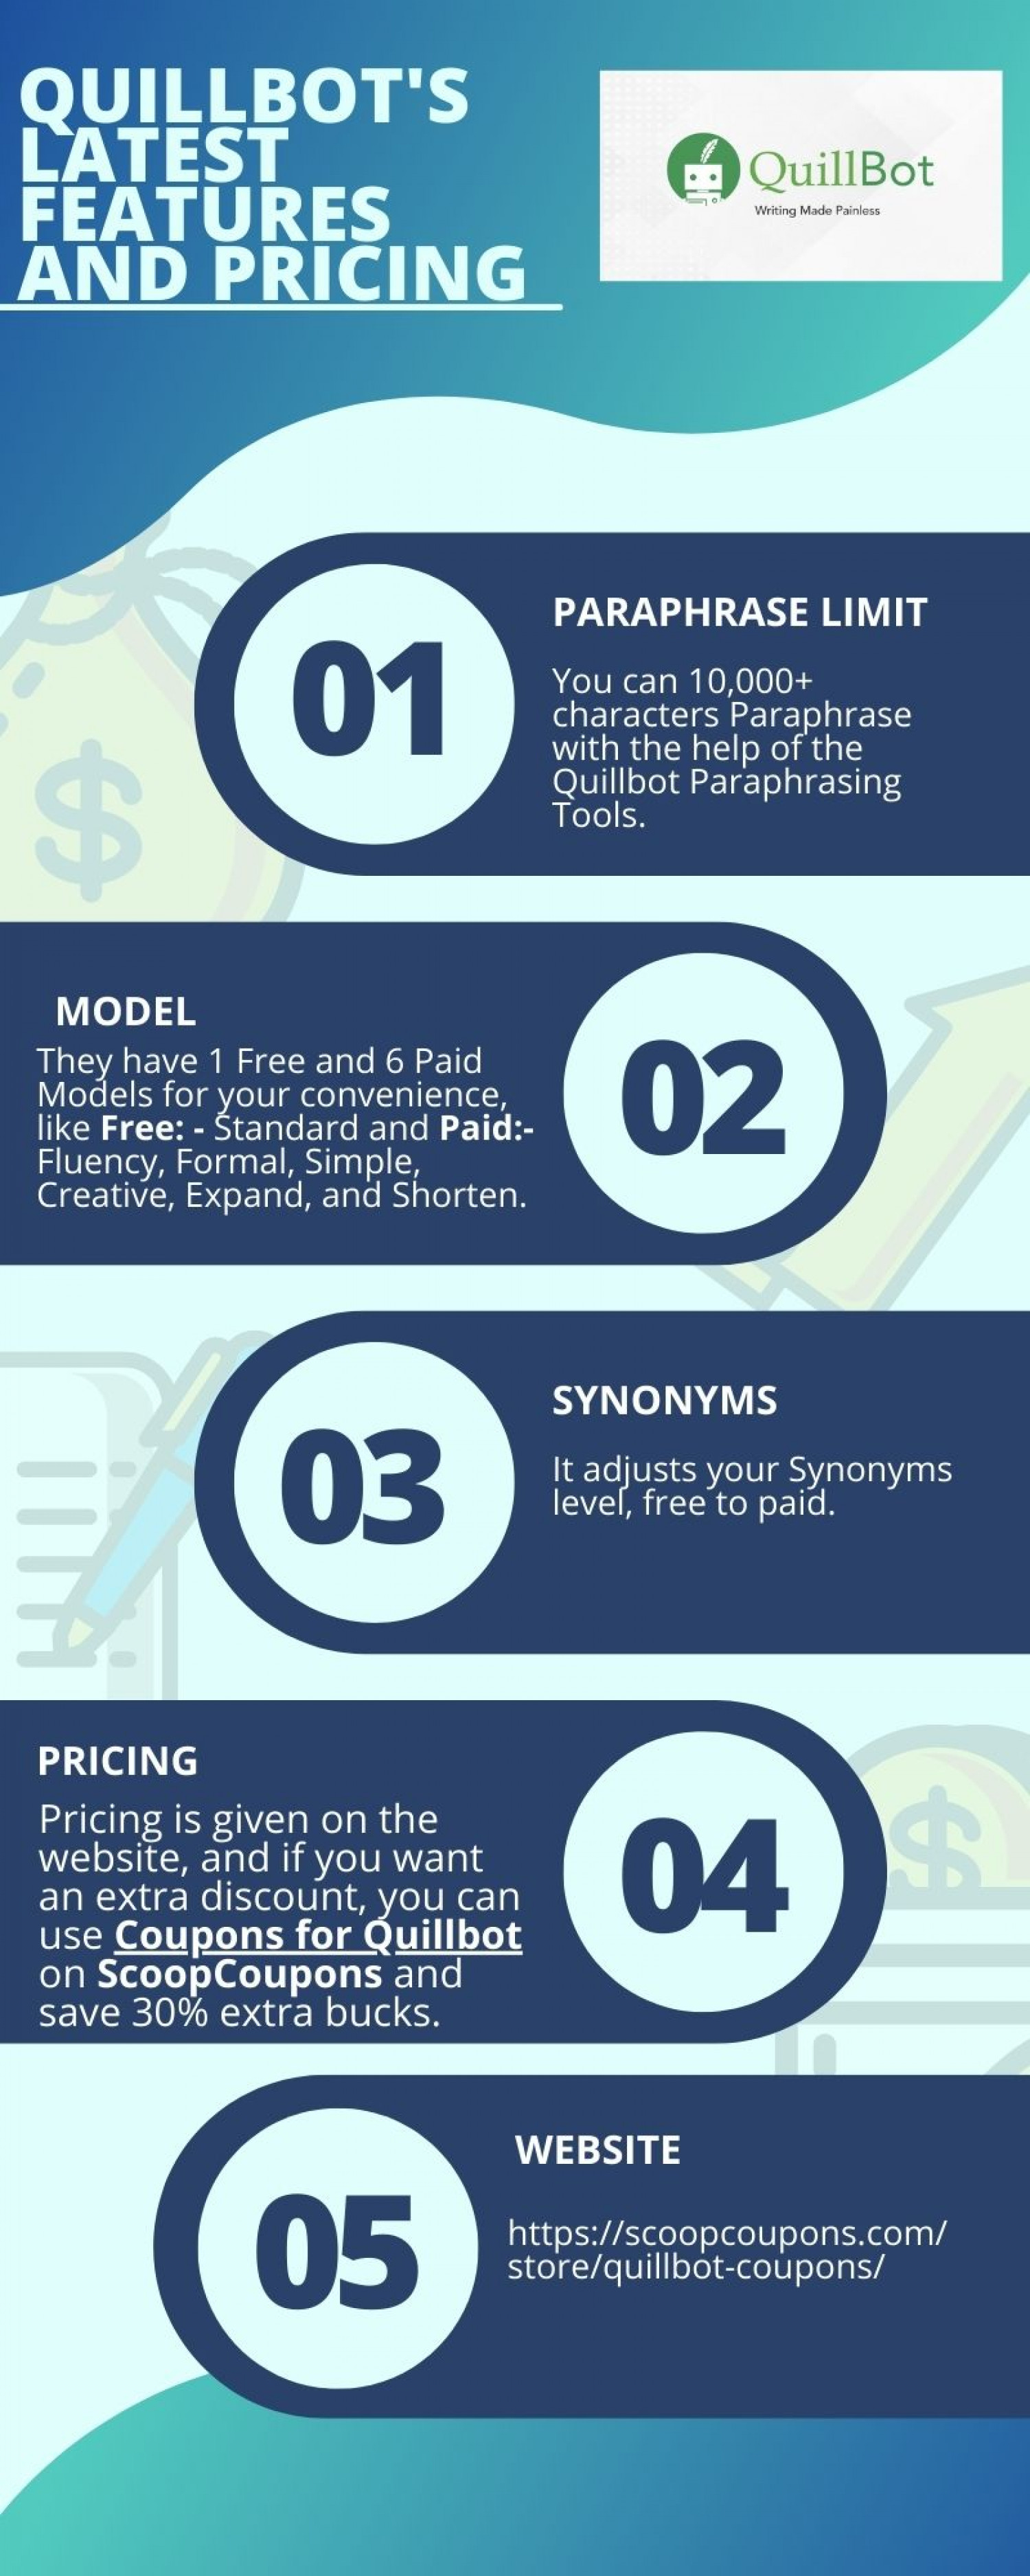 Quillbot's Latest Features And Pricing Infographic